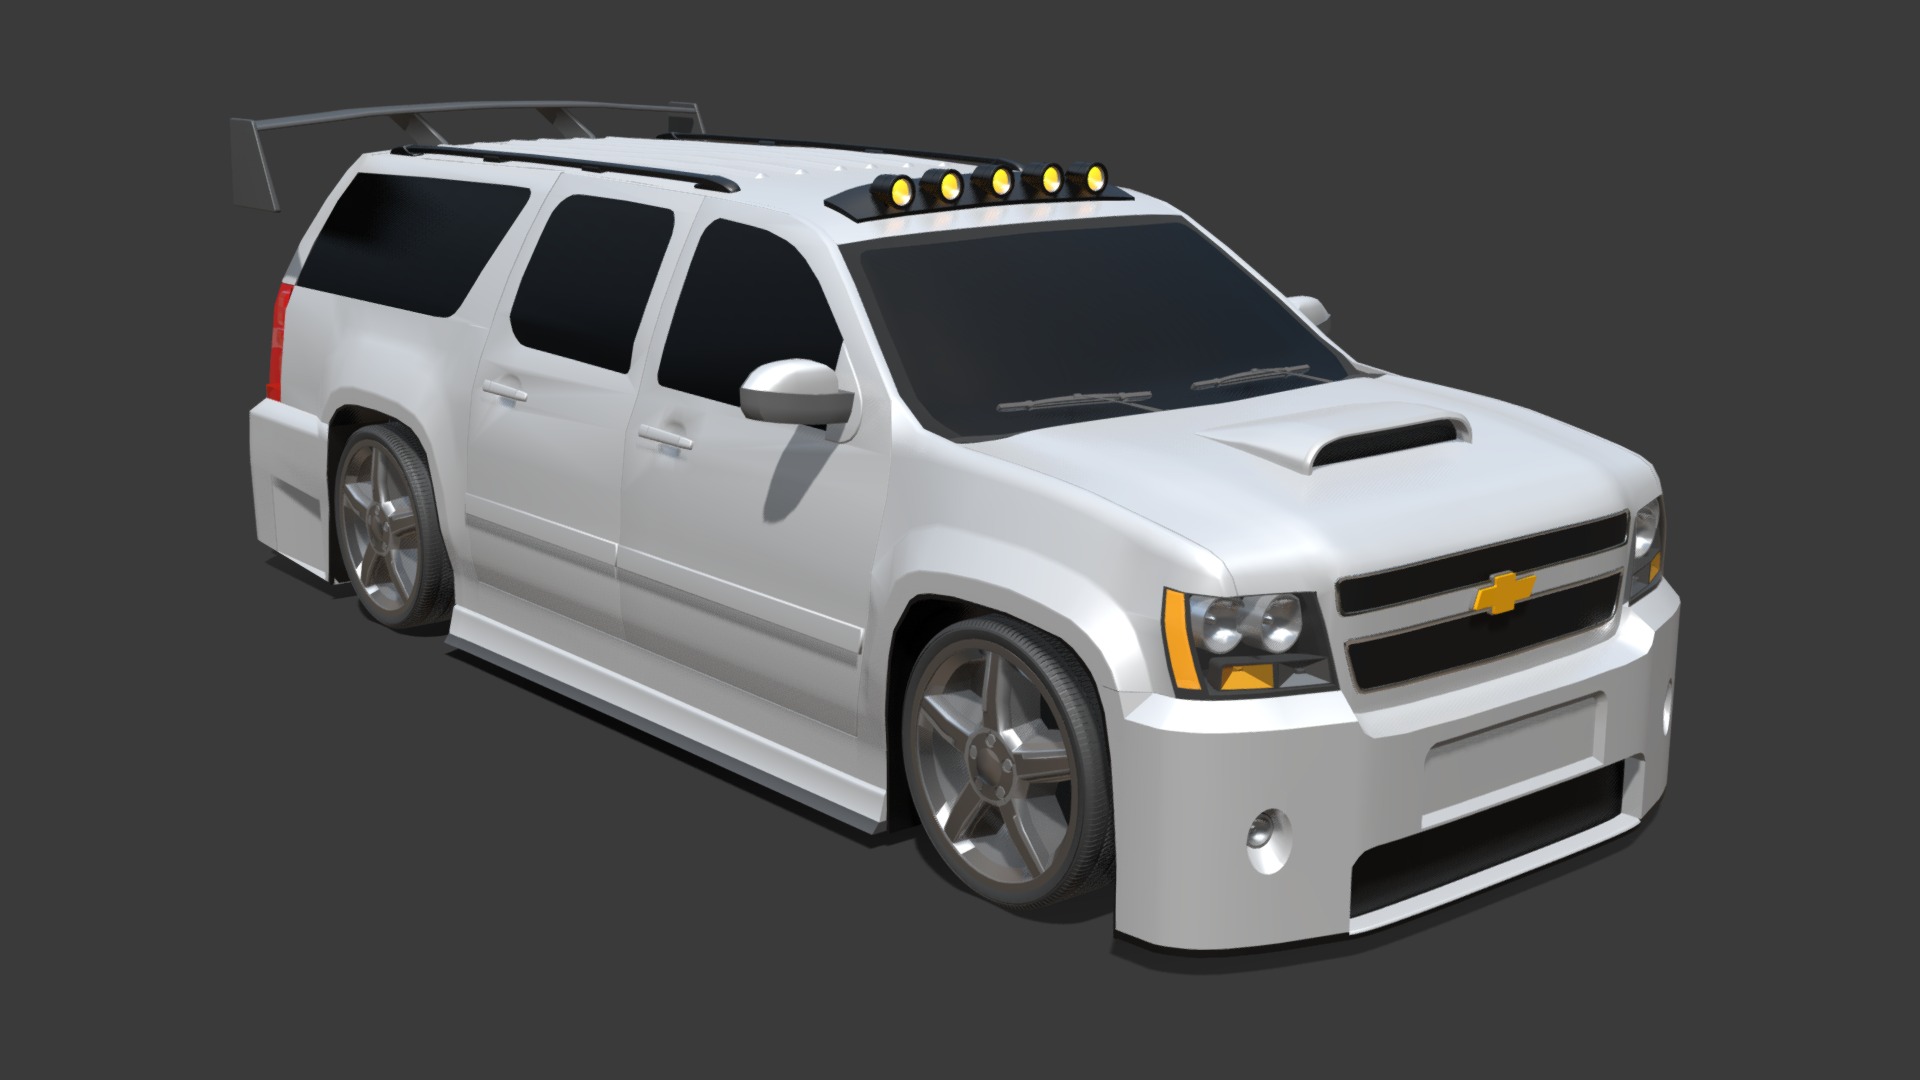 3D model Chevrolet Suburban 2008 Modified - This is a 3D model of the Chevrolet Suburban 2008 Modified. The 3D model is about a white car with a yellow light.